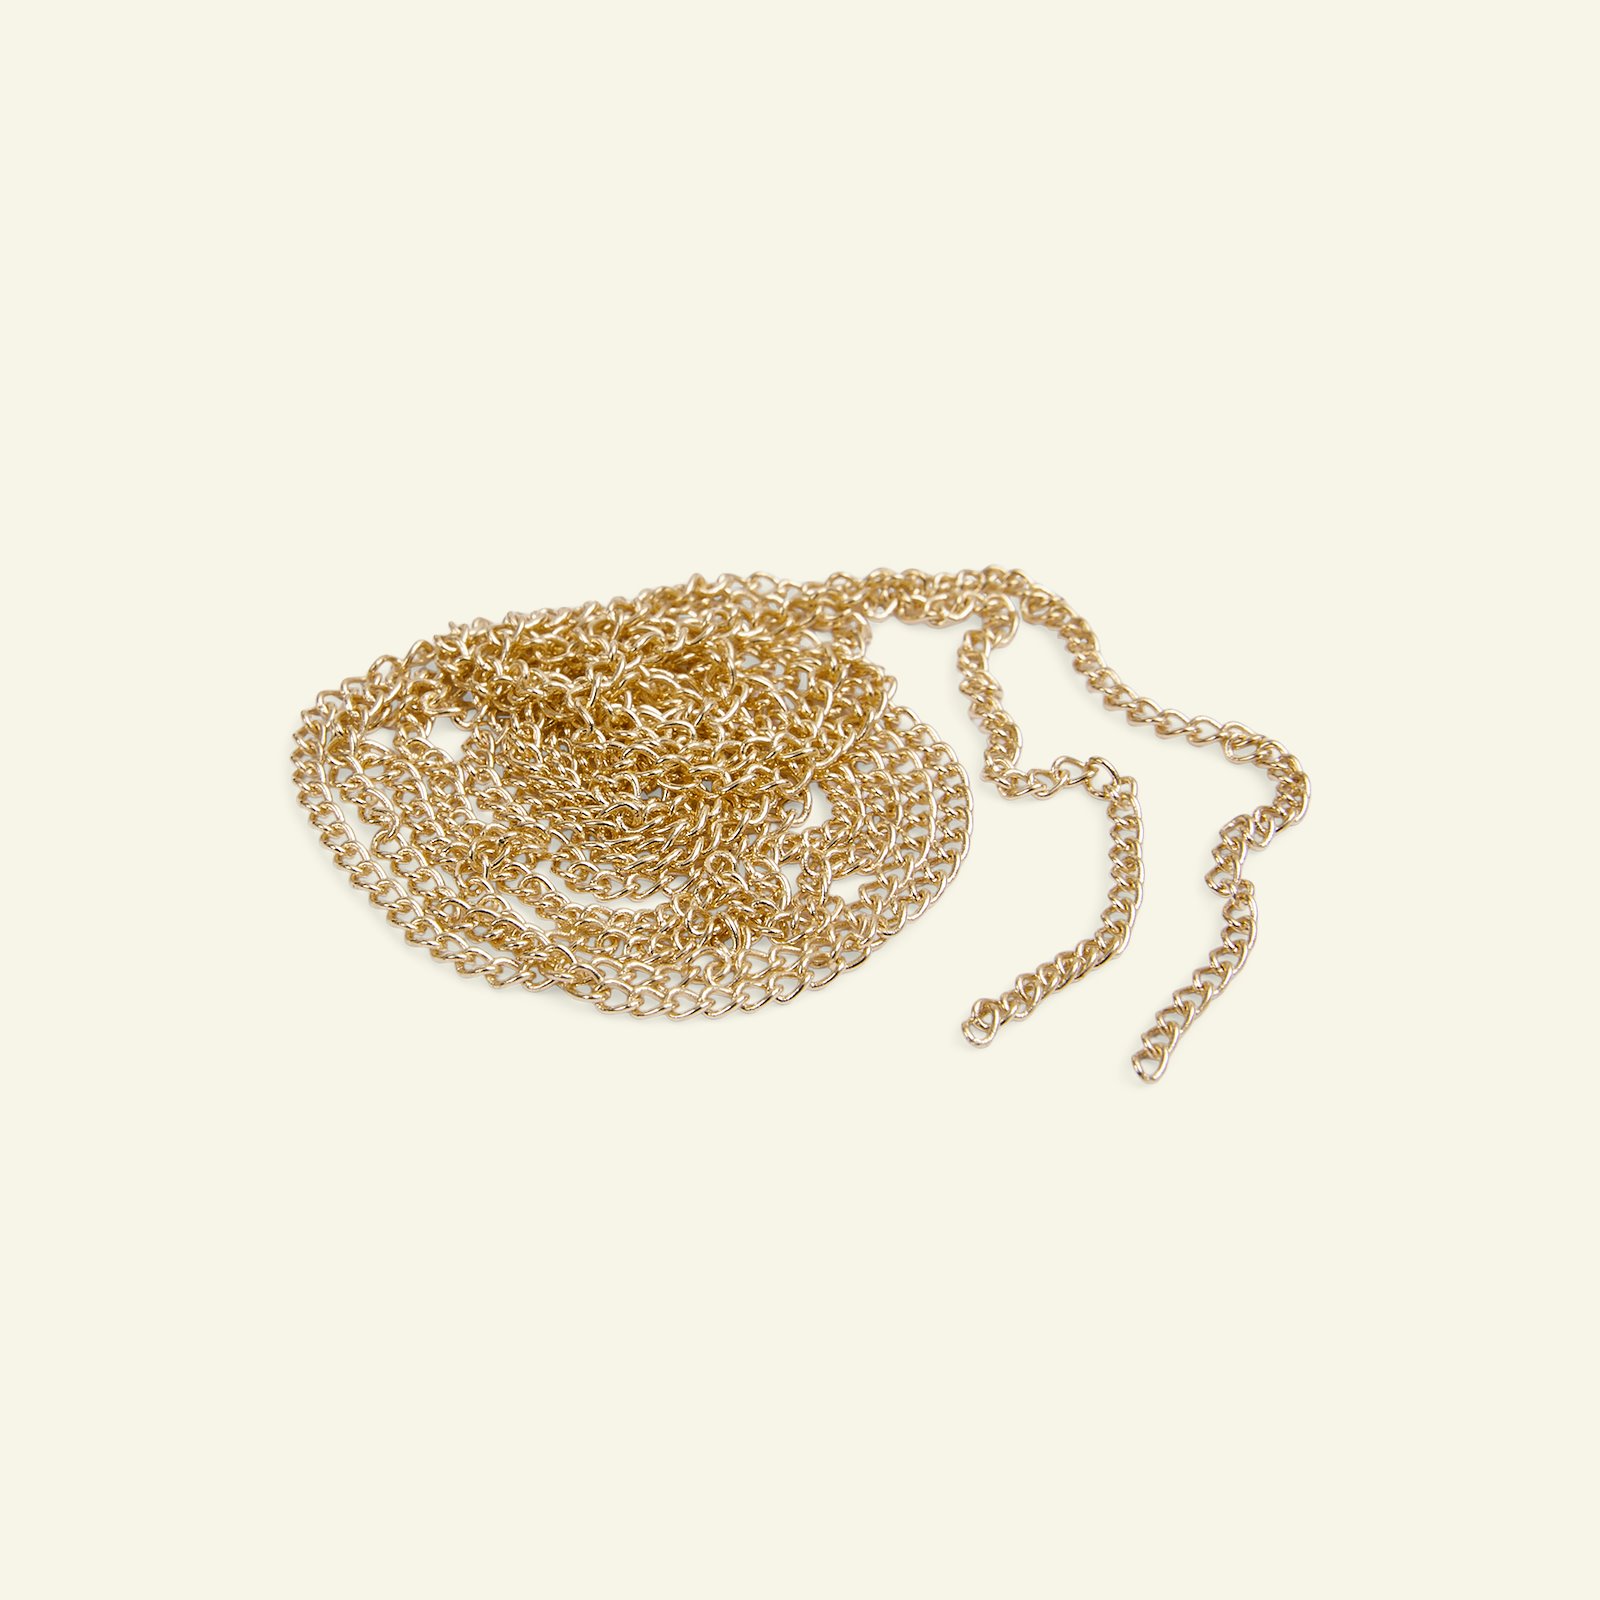 Chain 3mm gold colored 1m 45995_pack